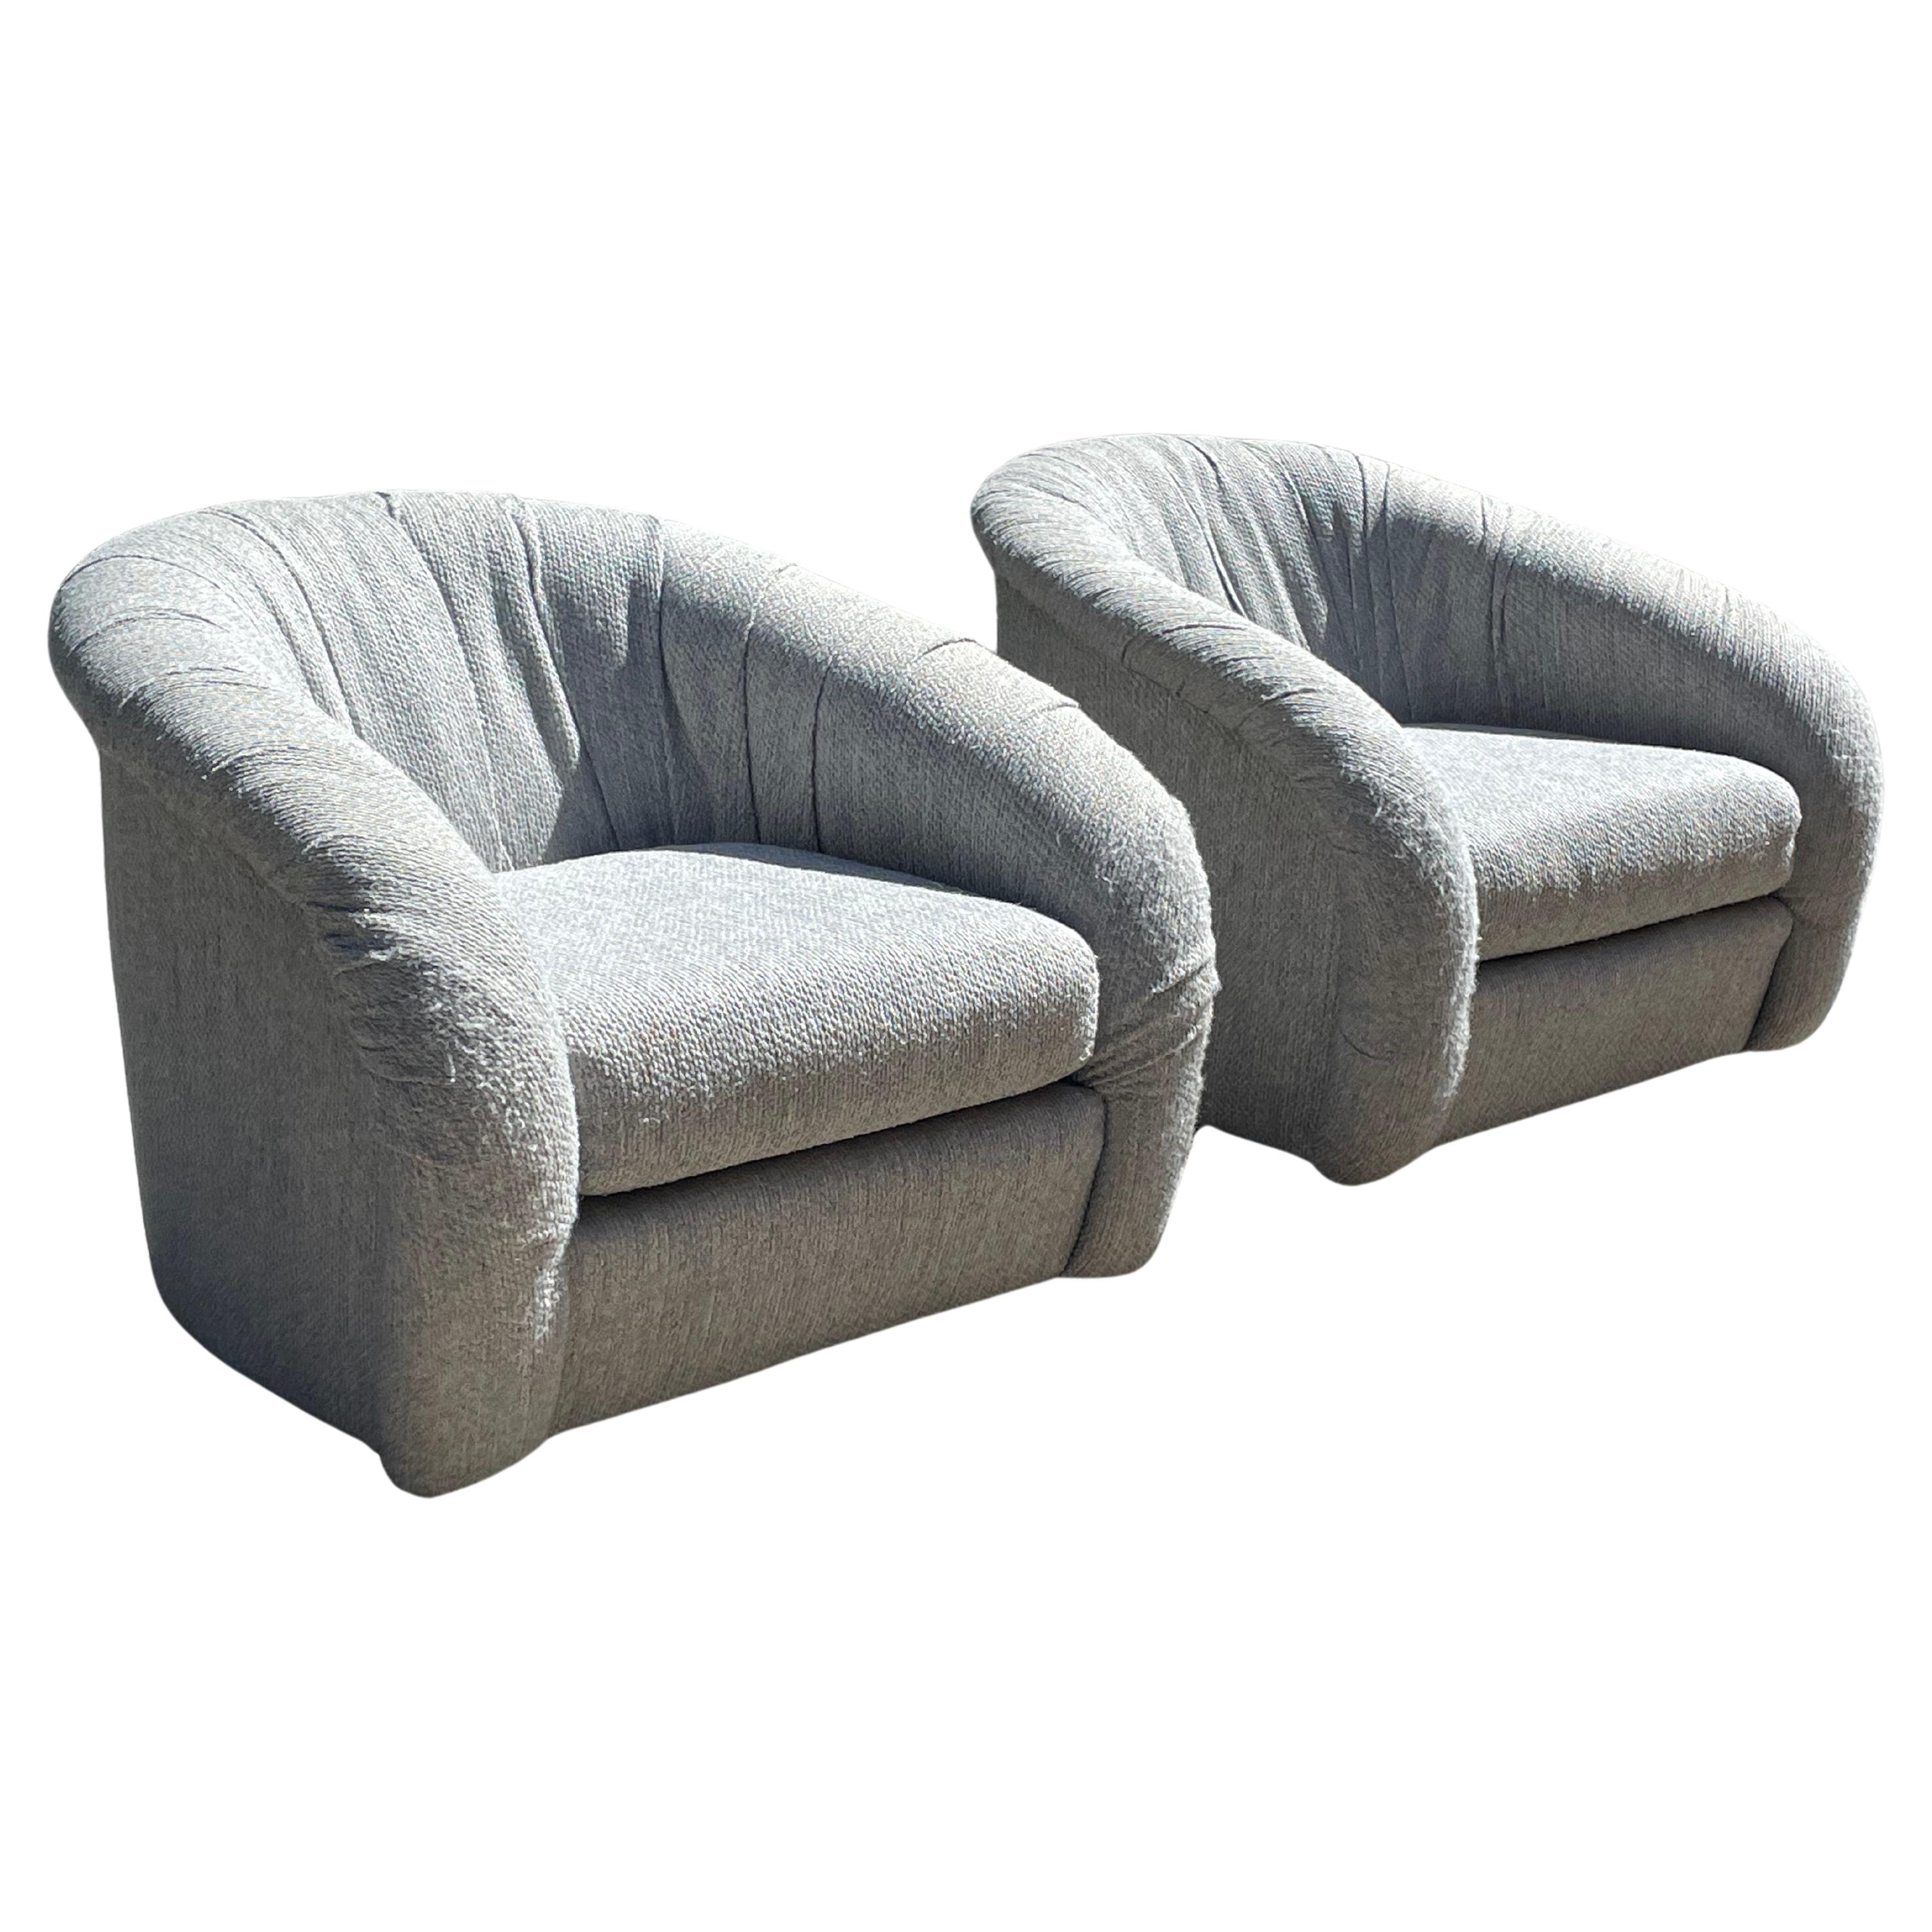 A stunning pair of Milo Baughman barrel swivel chairs. In original, blue grey fabric. Very good vintage condition.

Ruched 360° seat backs with super comfortable cushions. And they swivel. 

Dimensions -
34”w x 33”D x 28”H
Seat Height - 16”H

Price